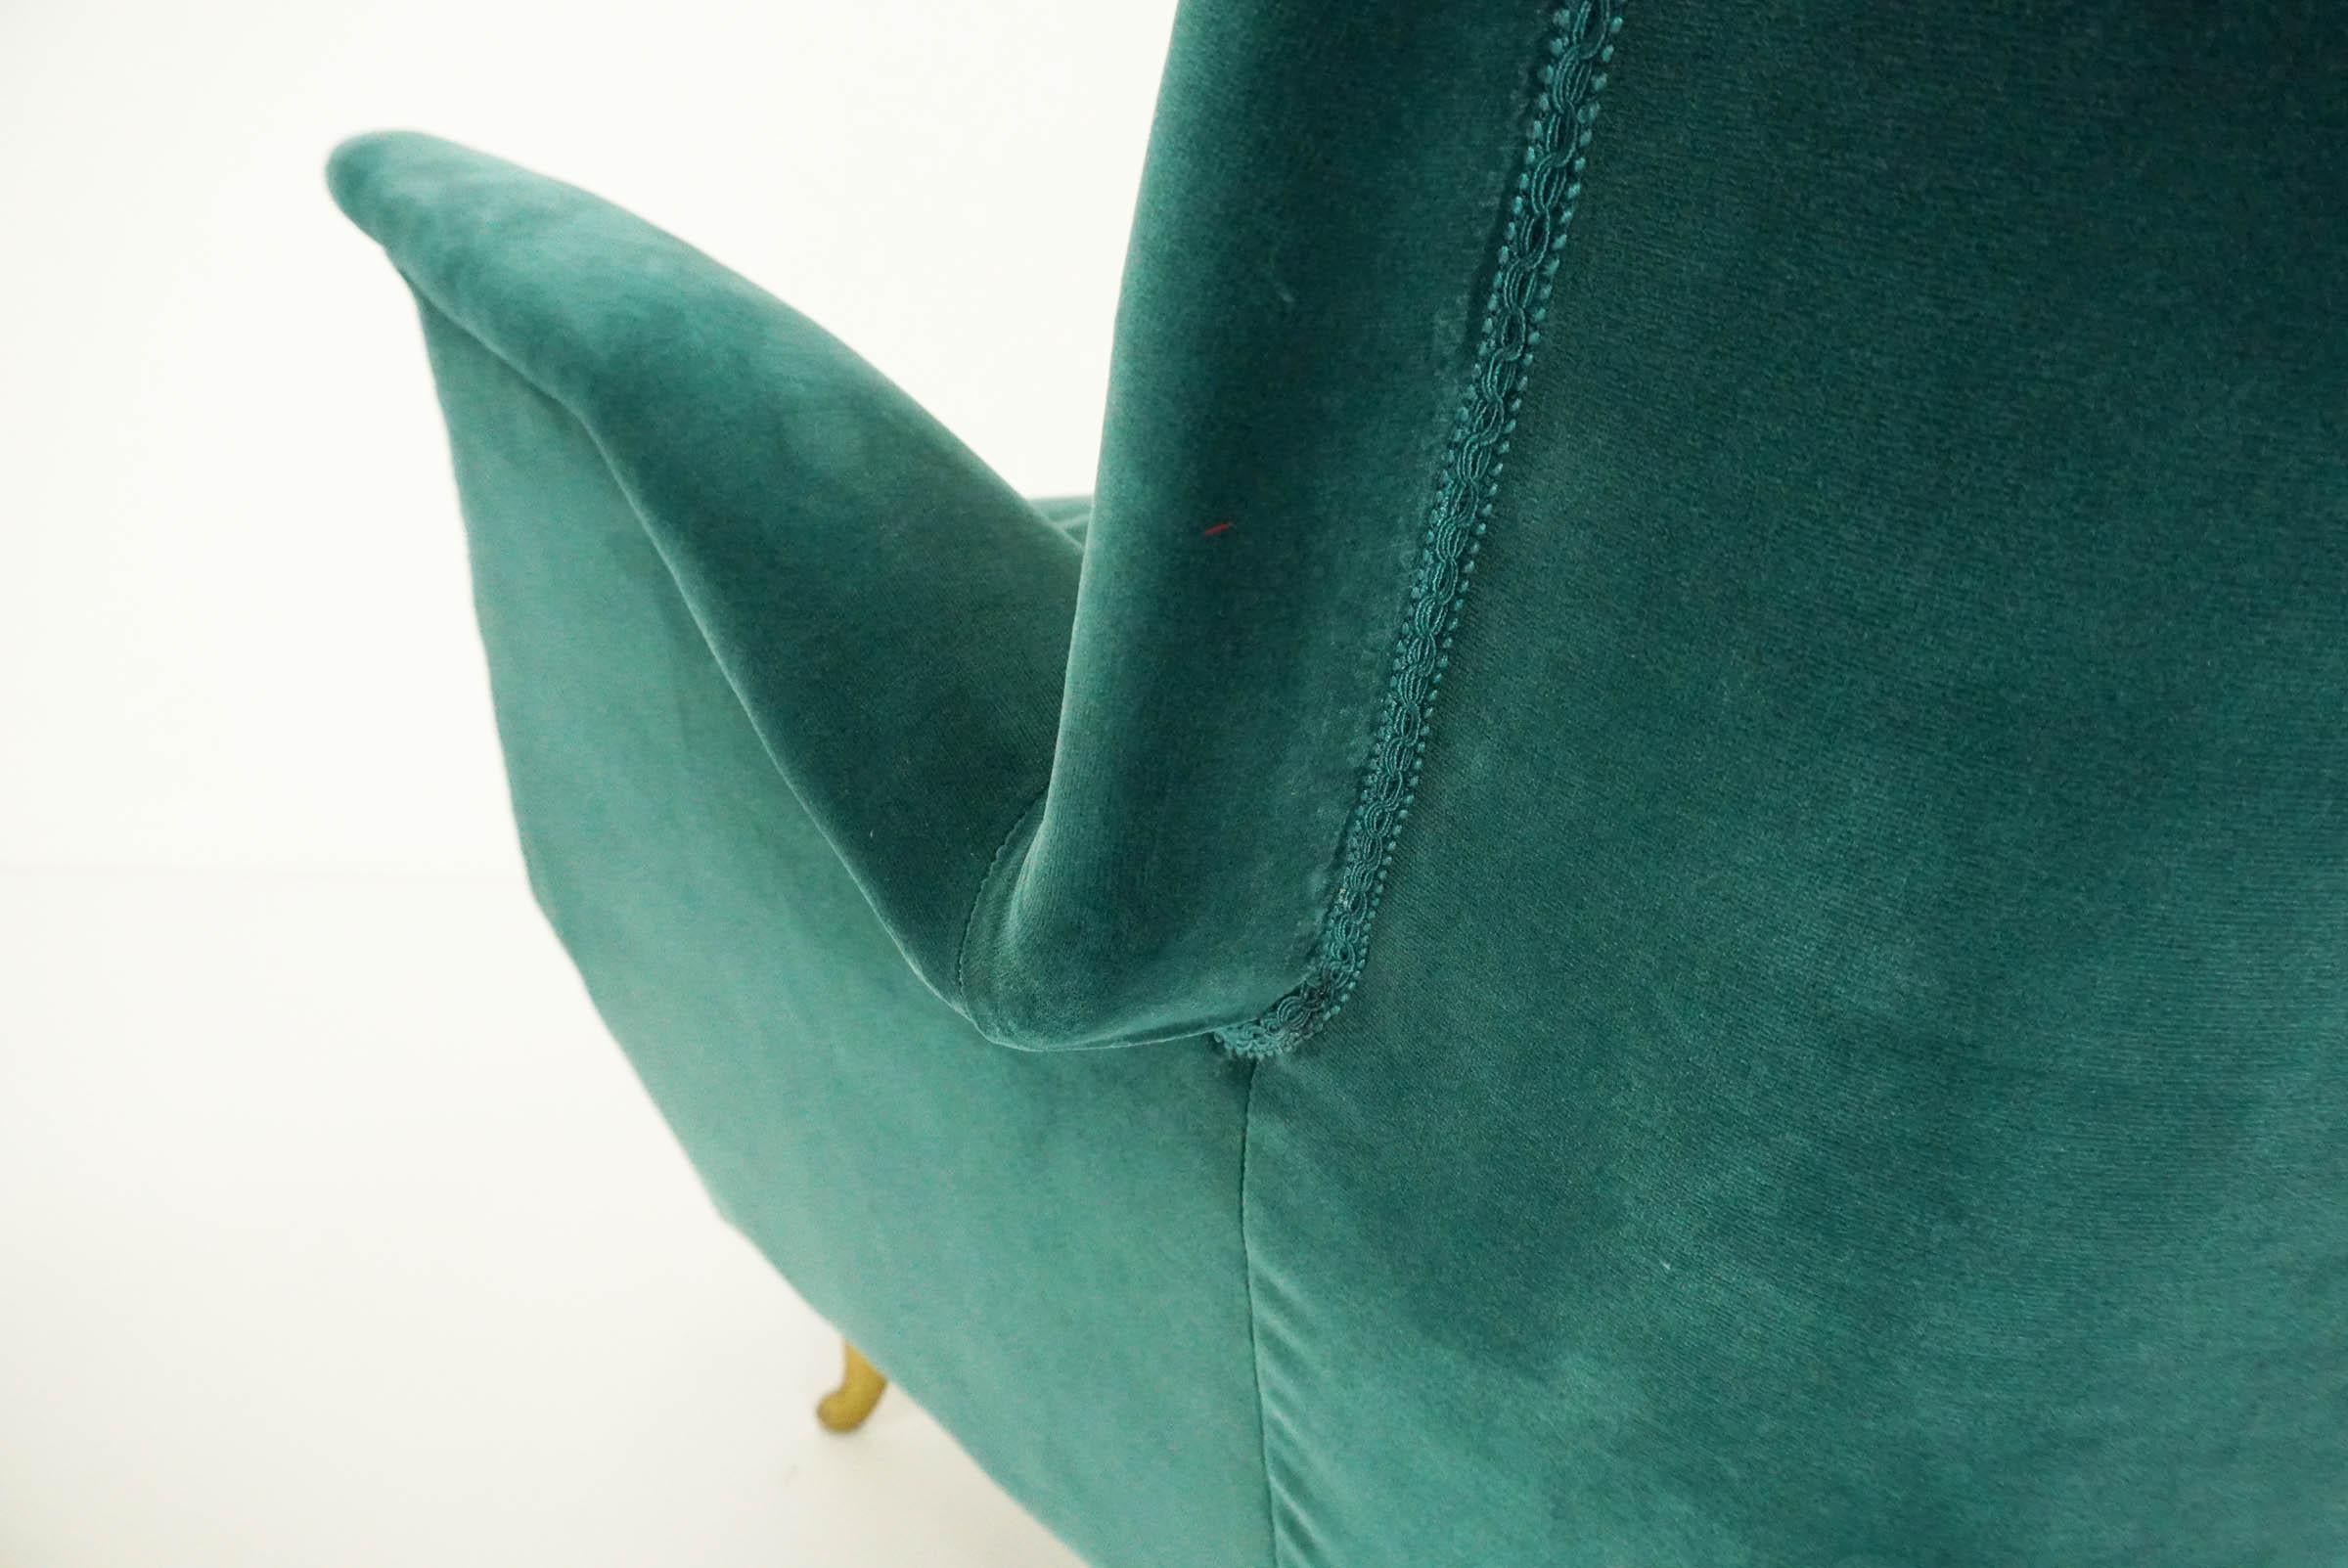 Cold-Painted Elegant Deep Green Velvet for This Cozy Armchair Produced by ISA, Italy, 1959